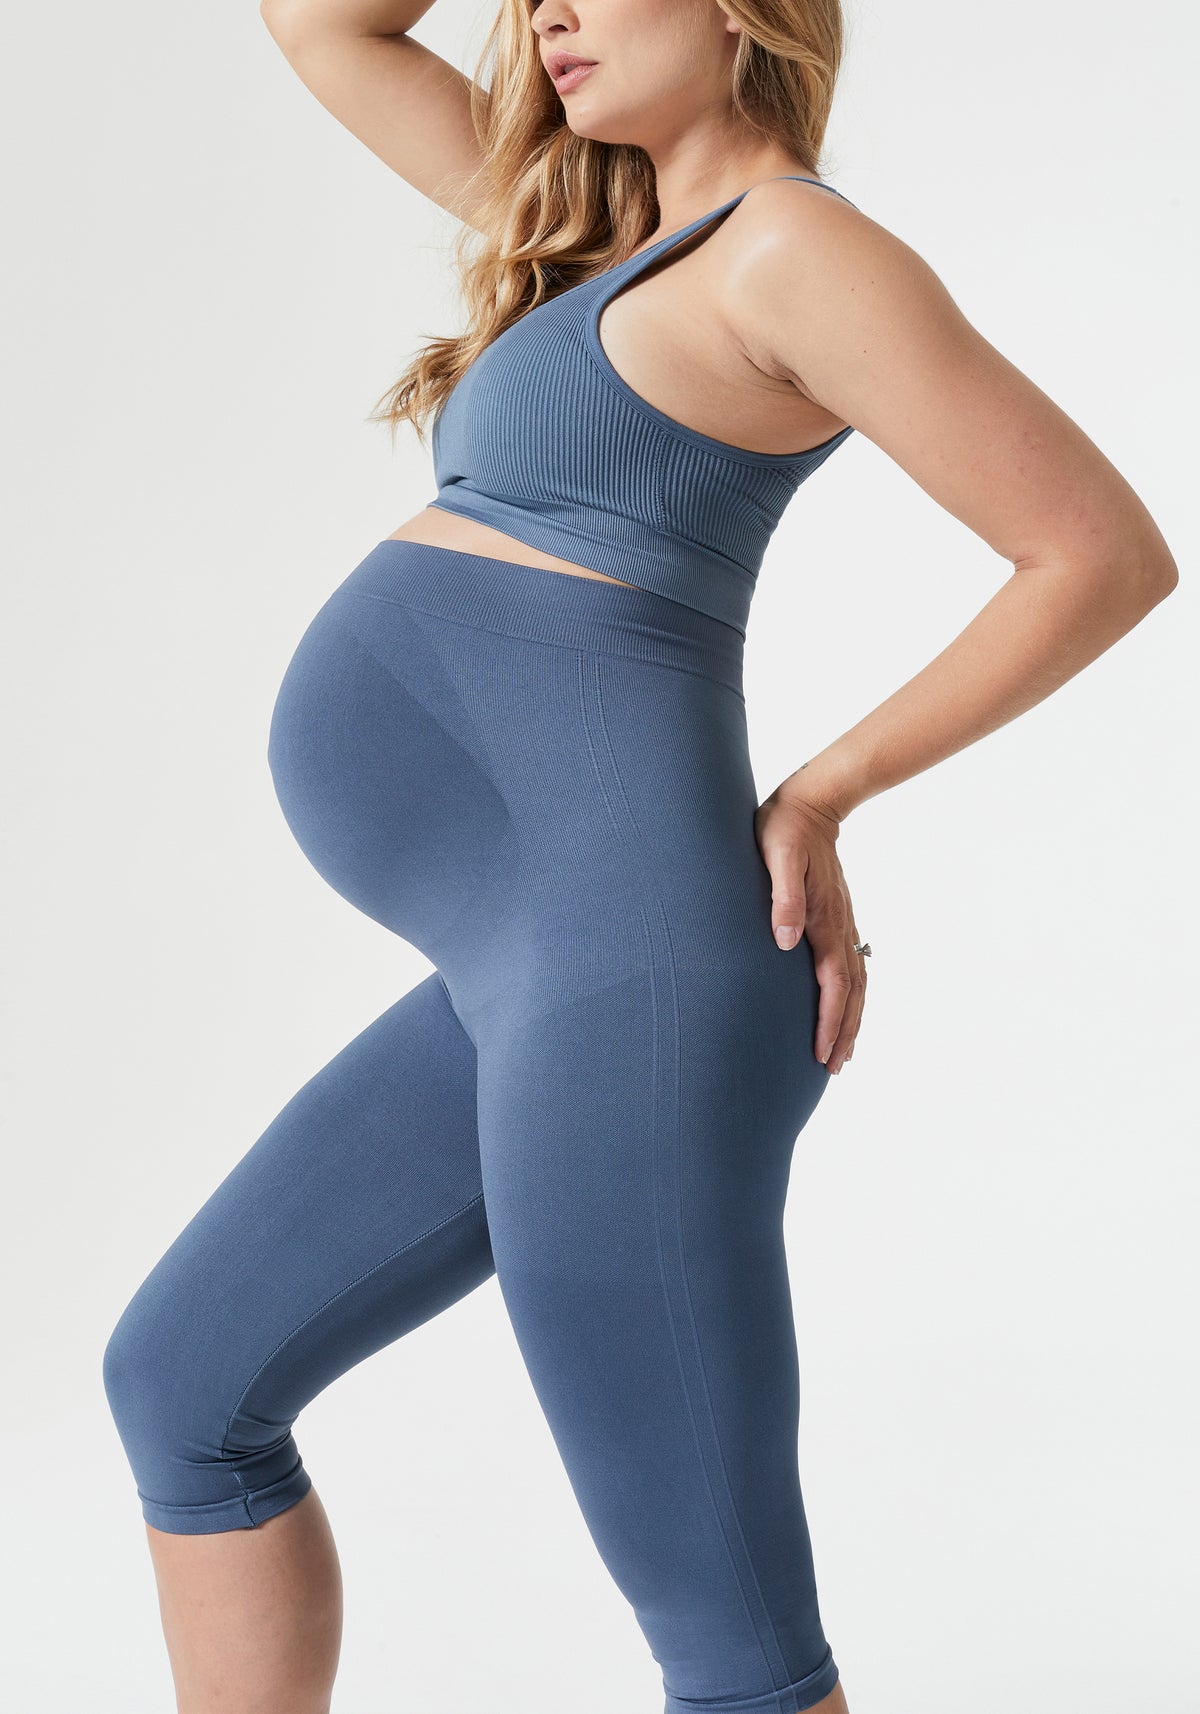  BLANQI Maternity Belly Support Activewear Biker Shorts